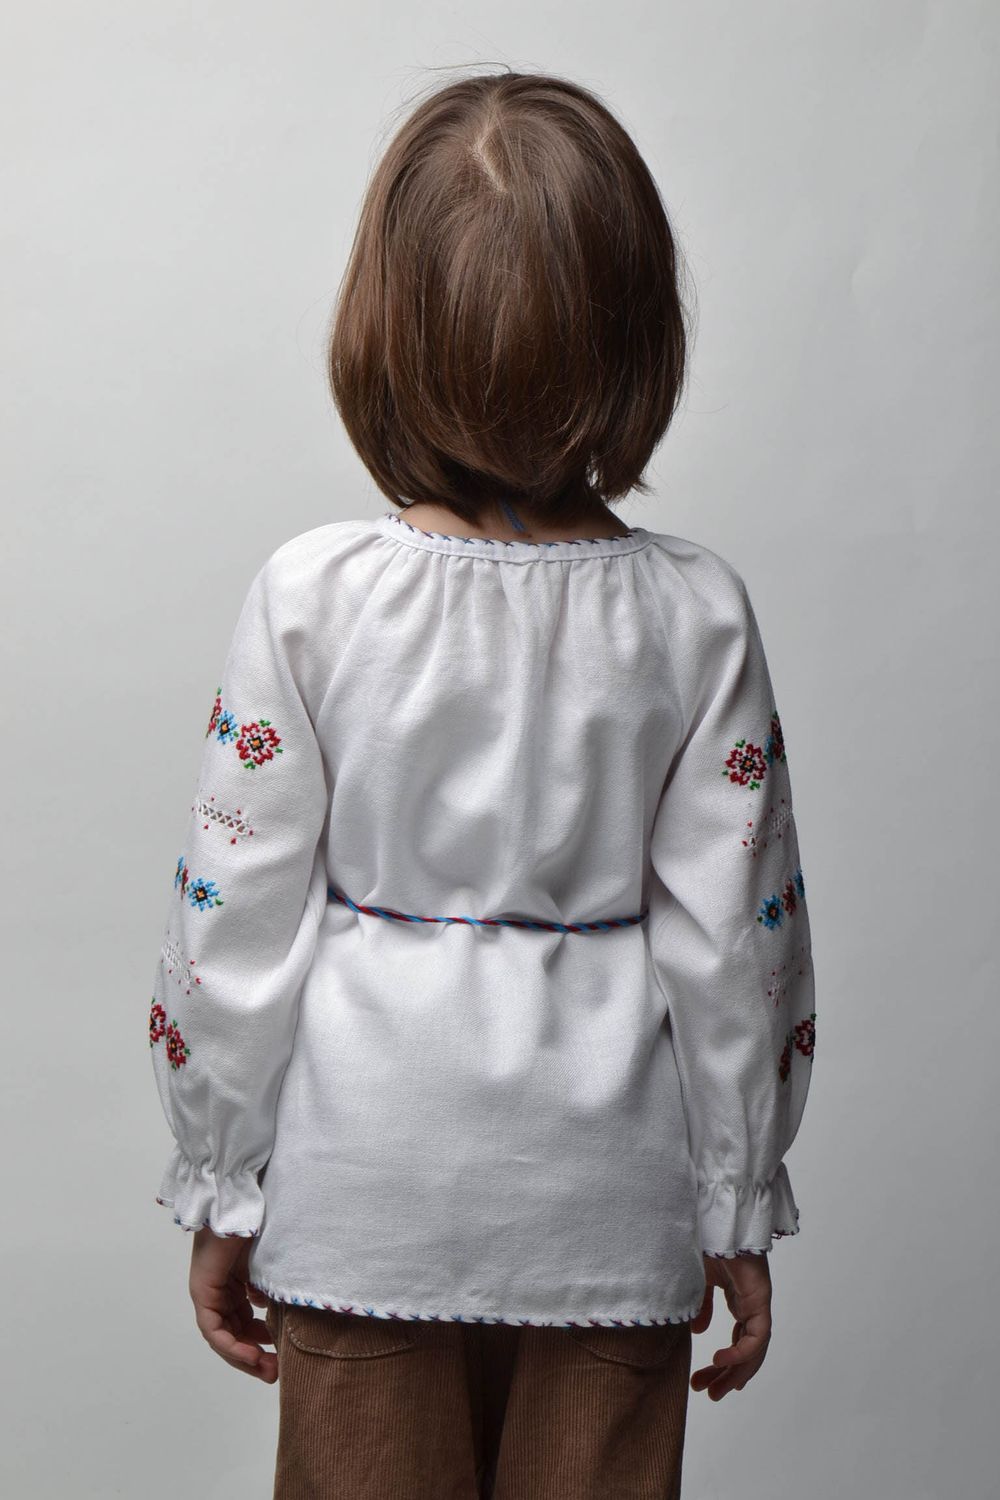 Embroidered long sleeve shirt with belt for 5-7 years old children photo 4